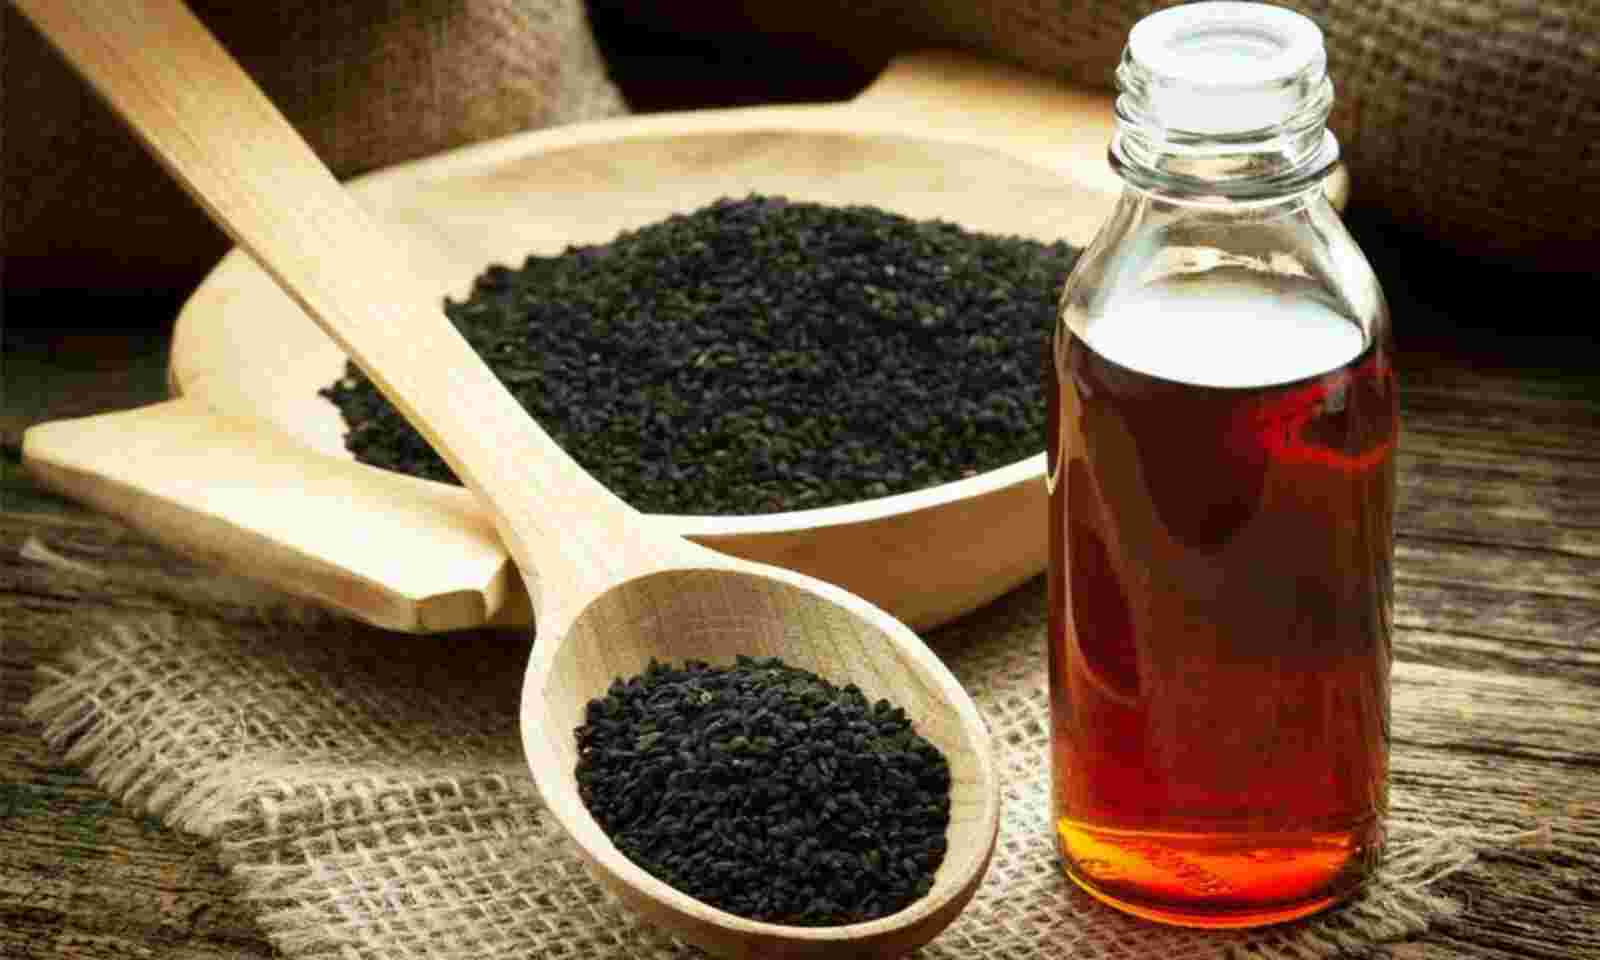 How to use Kalonji oil for hair problems